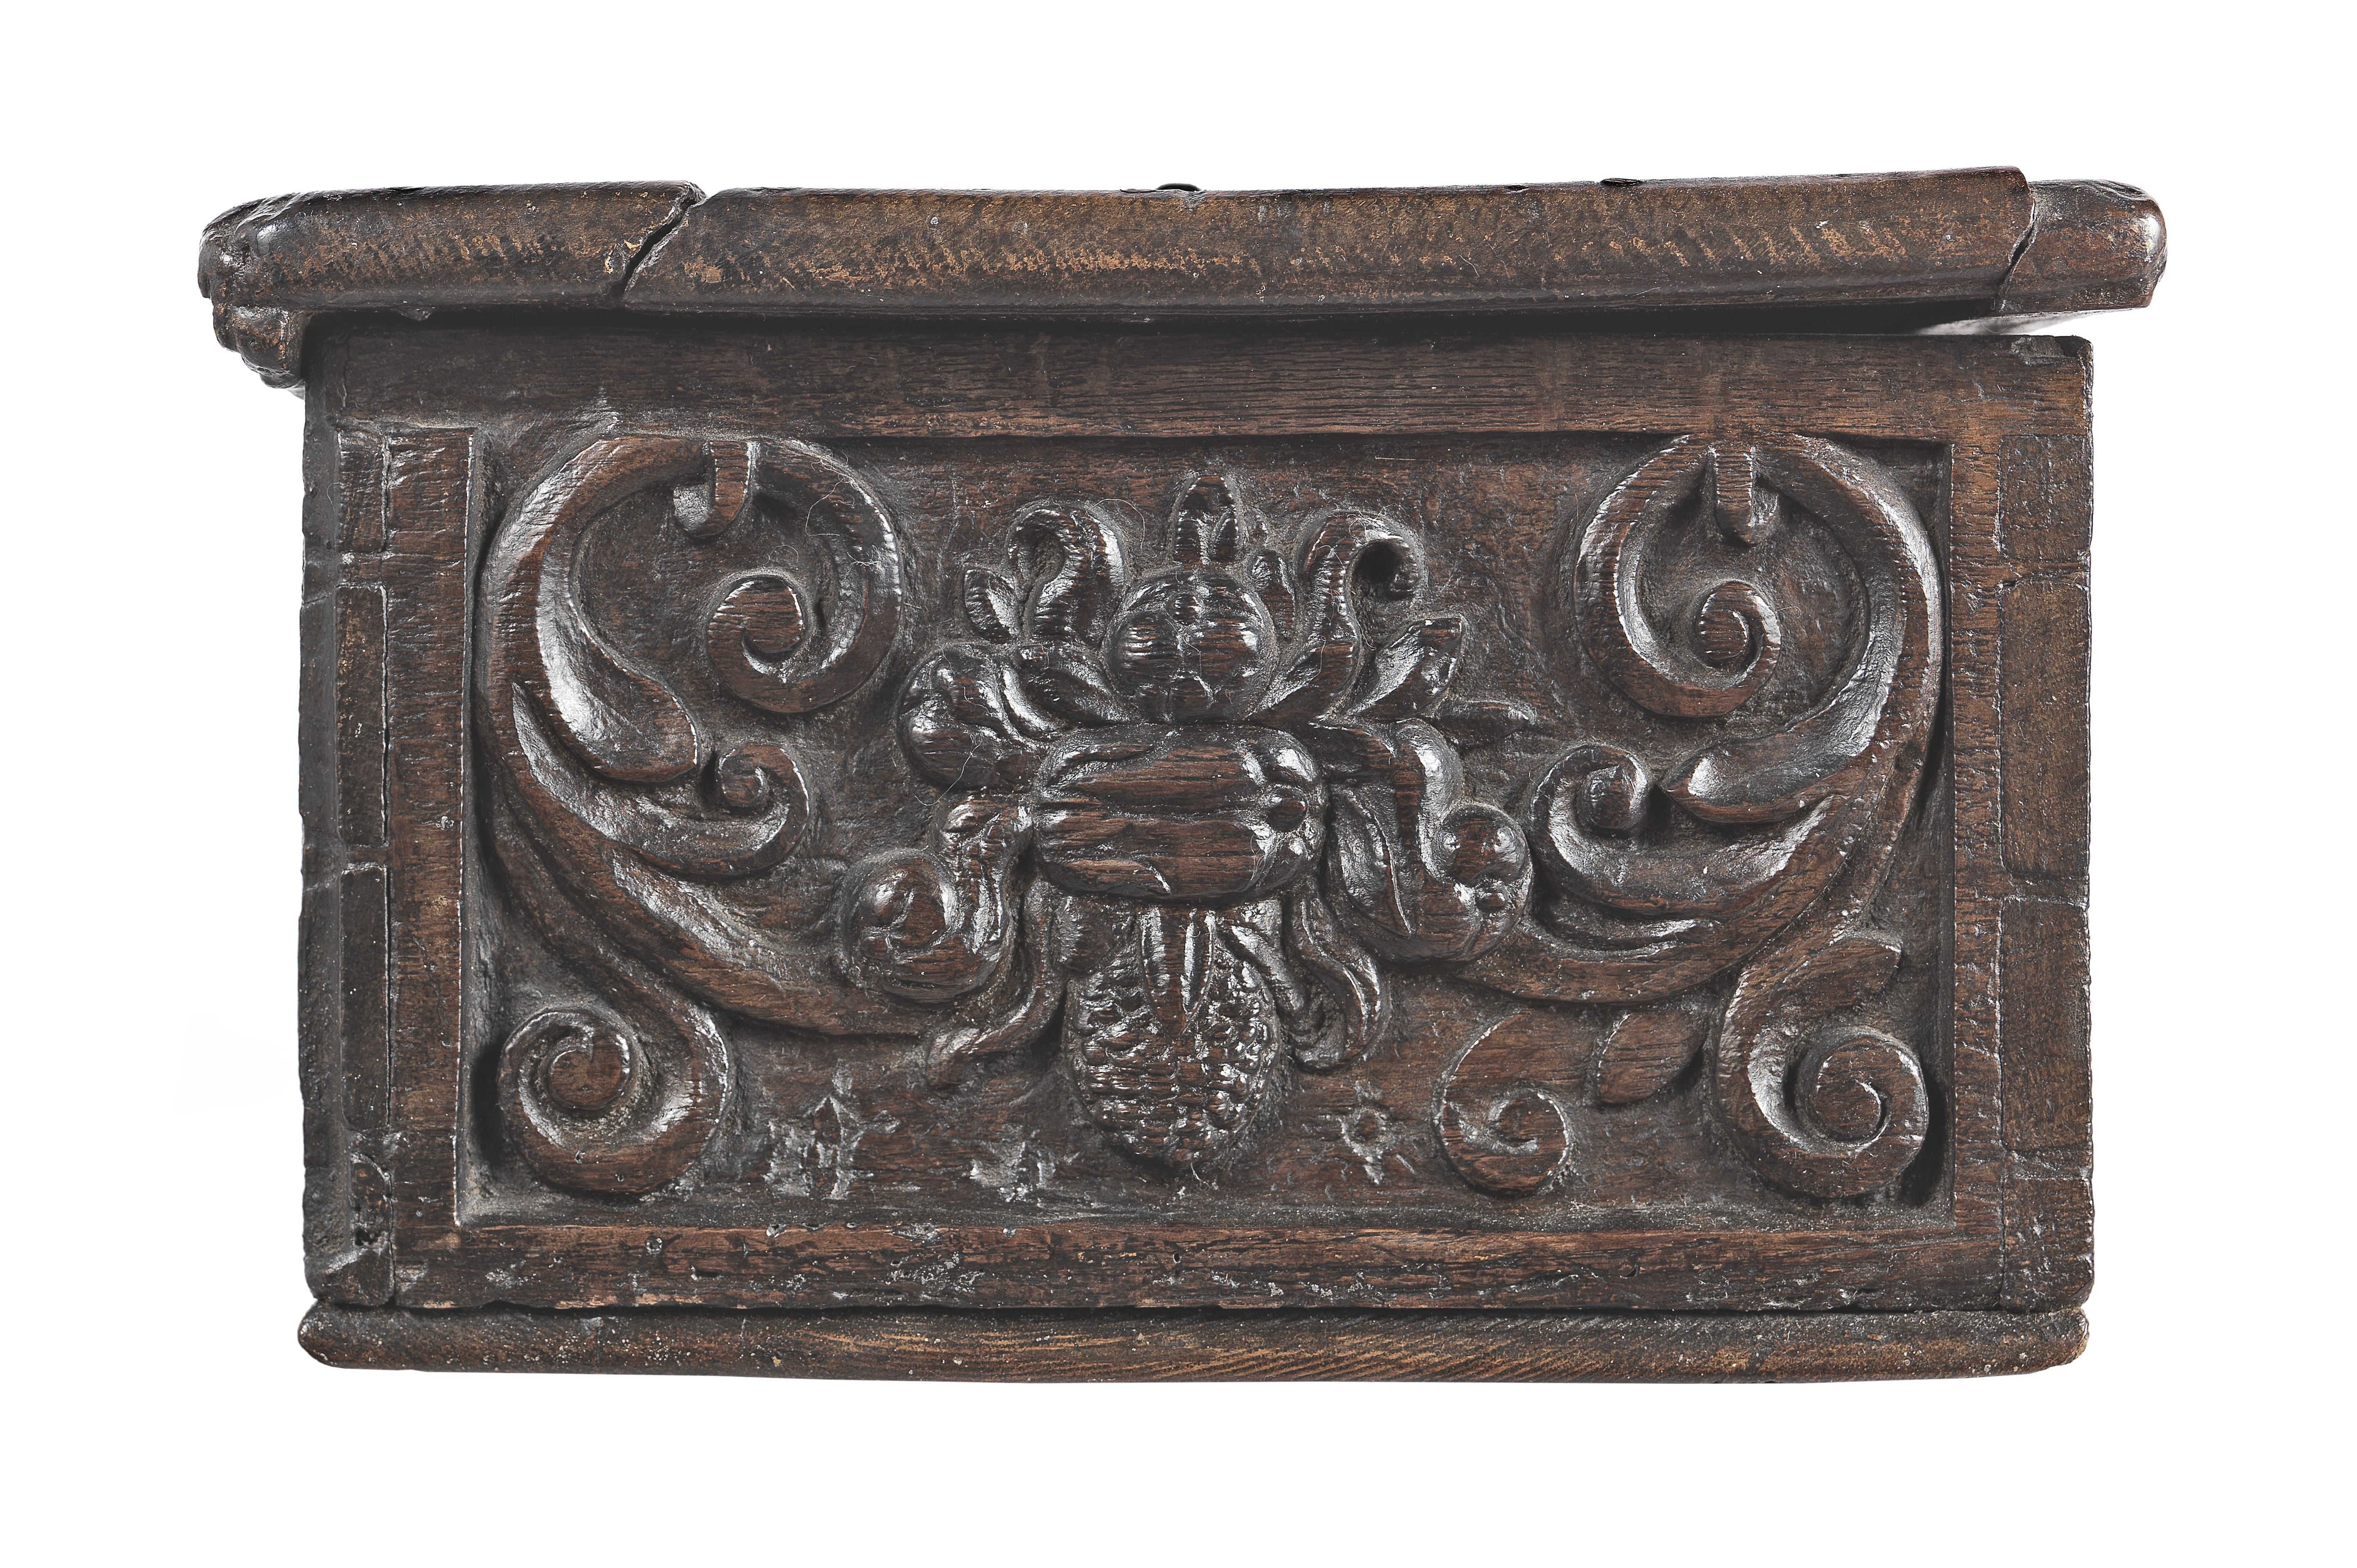 A rare and documented boarded oak box, probably Northern German, circa 1600